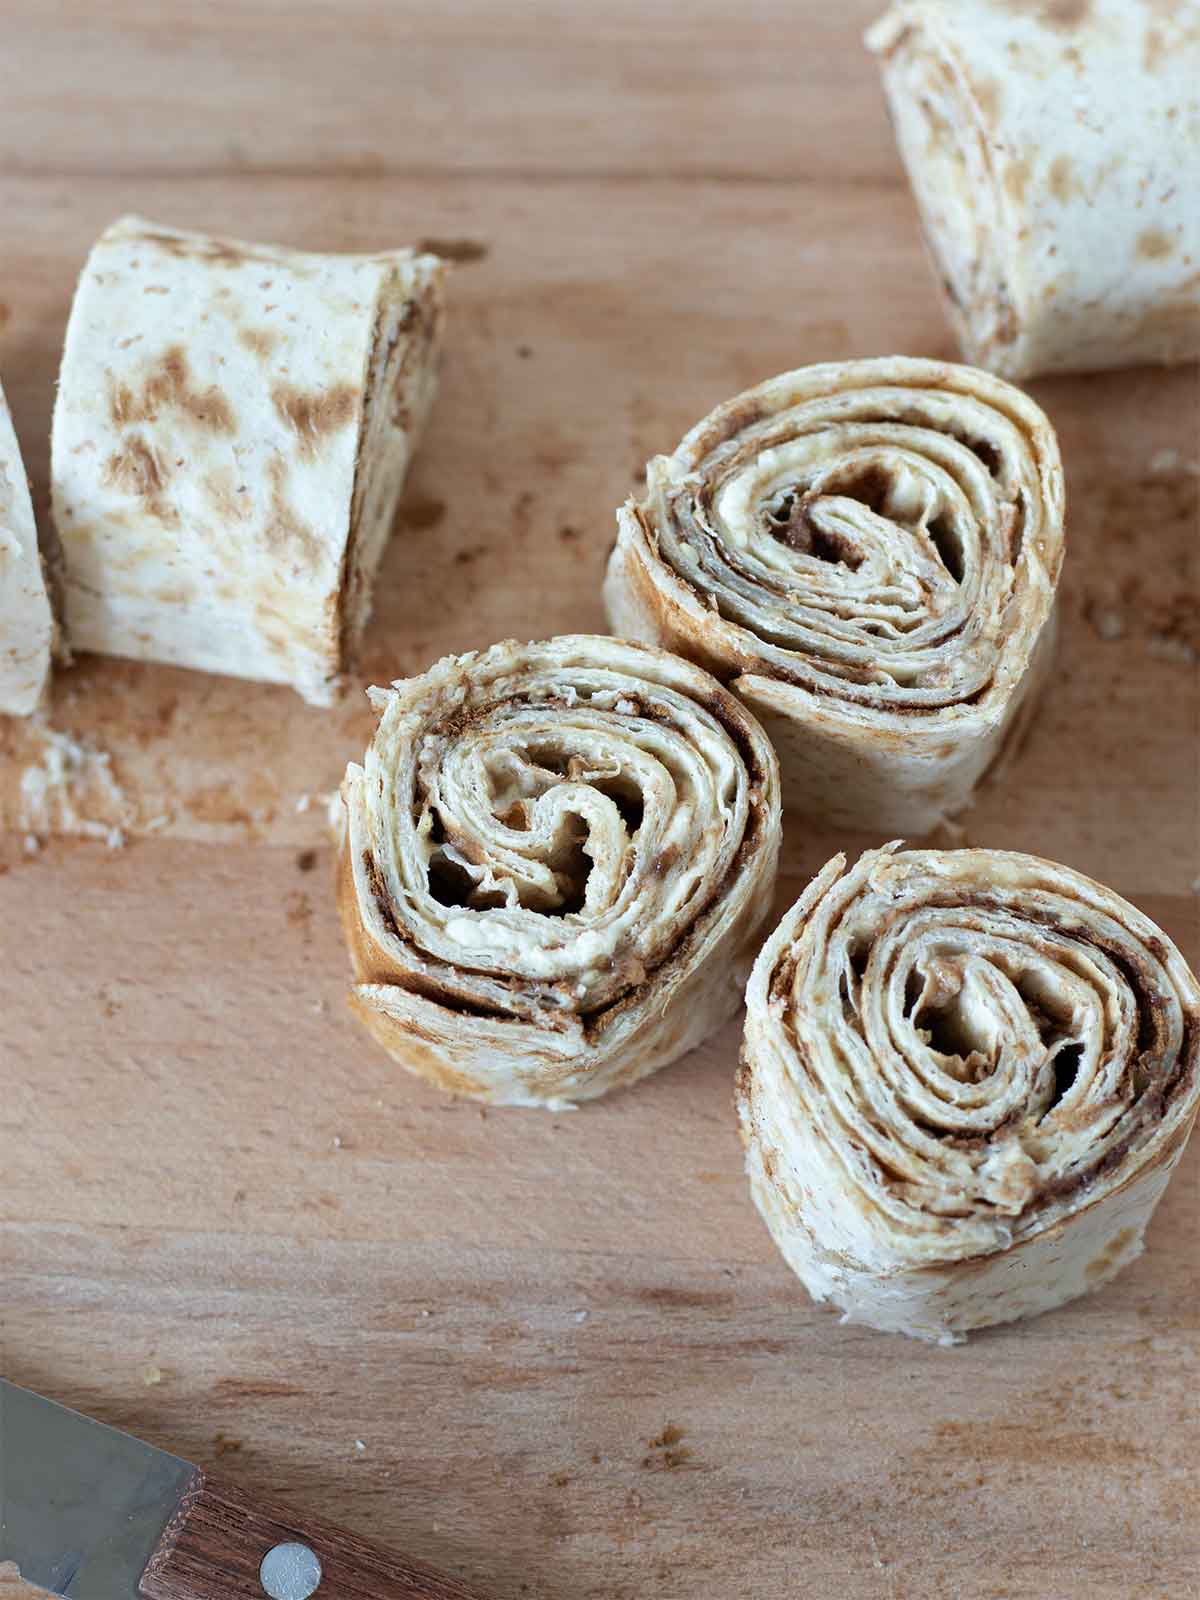 Cinnamon tortilla roll ups with cream cheese and brown sugar.